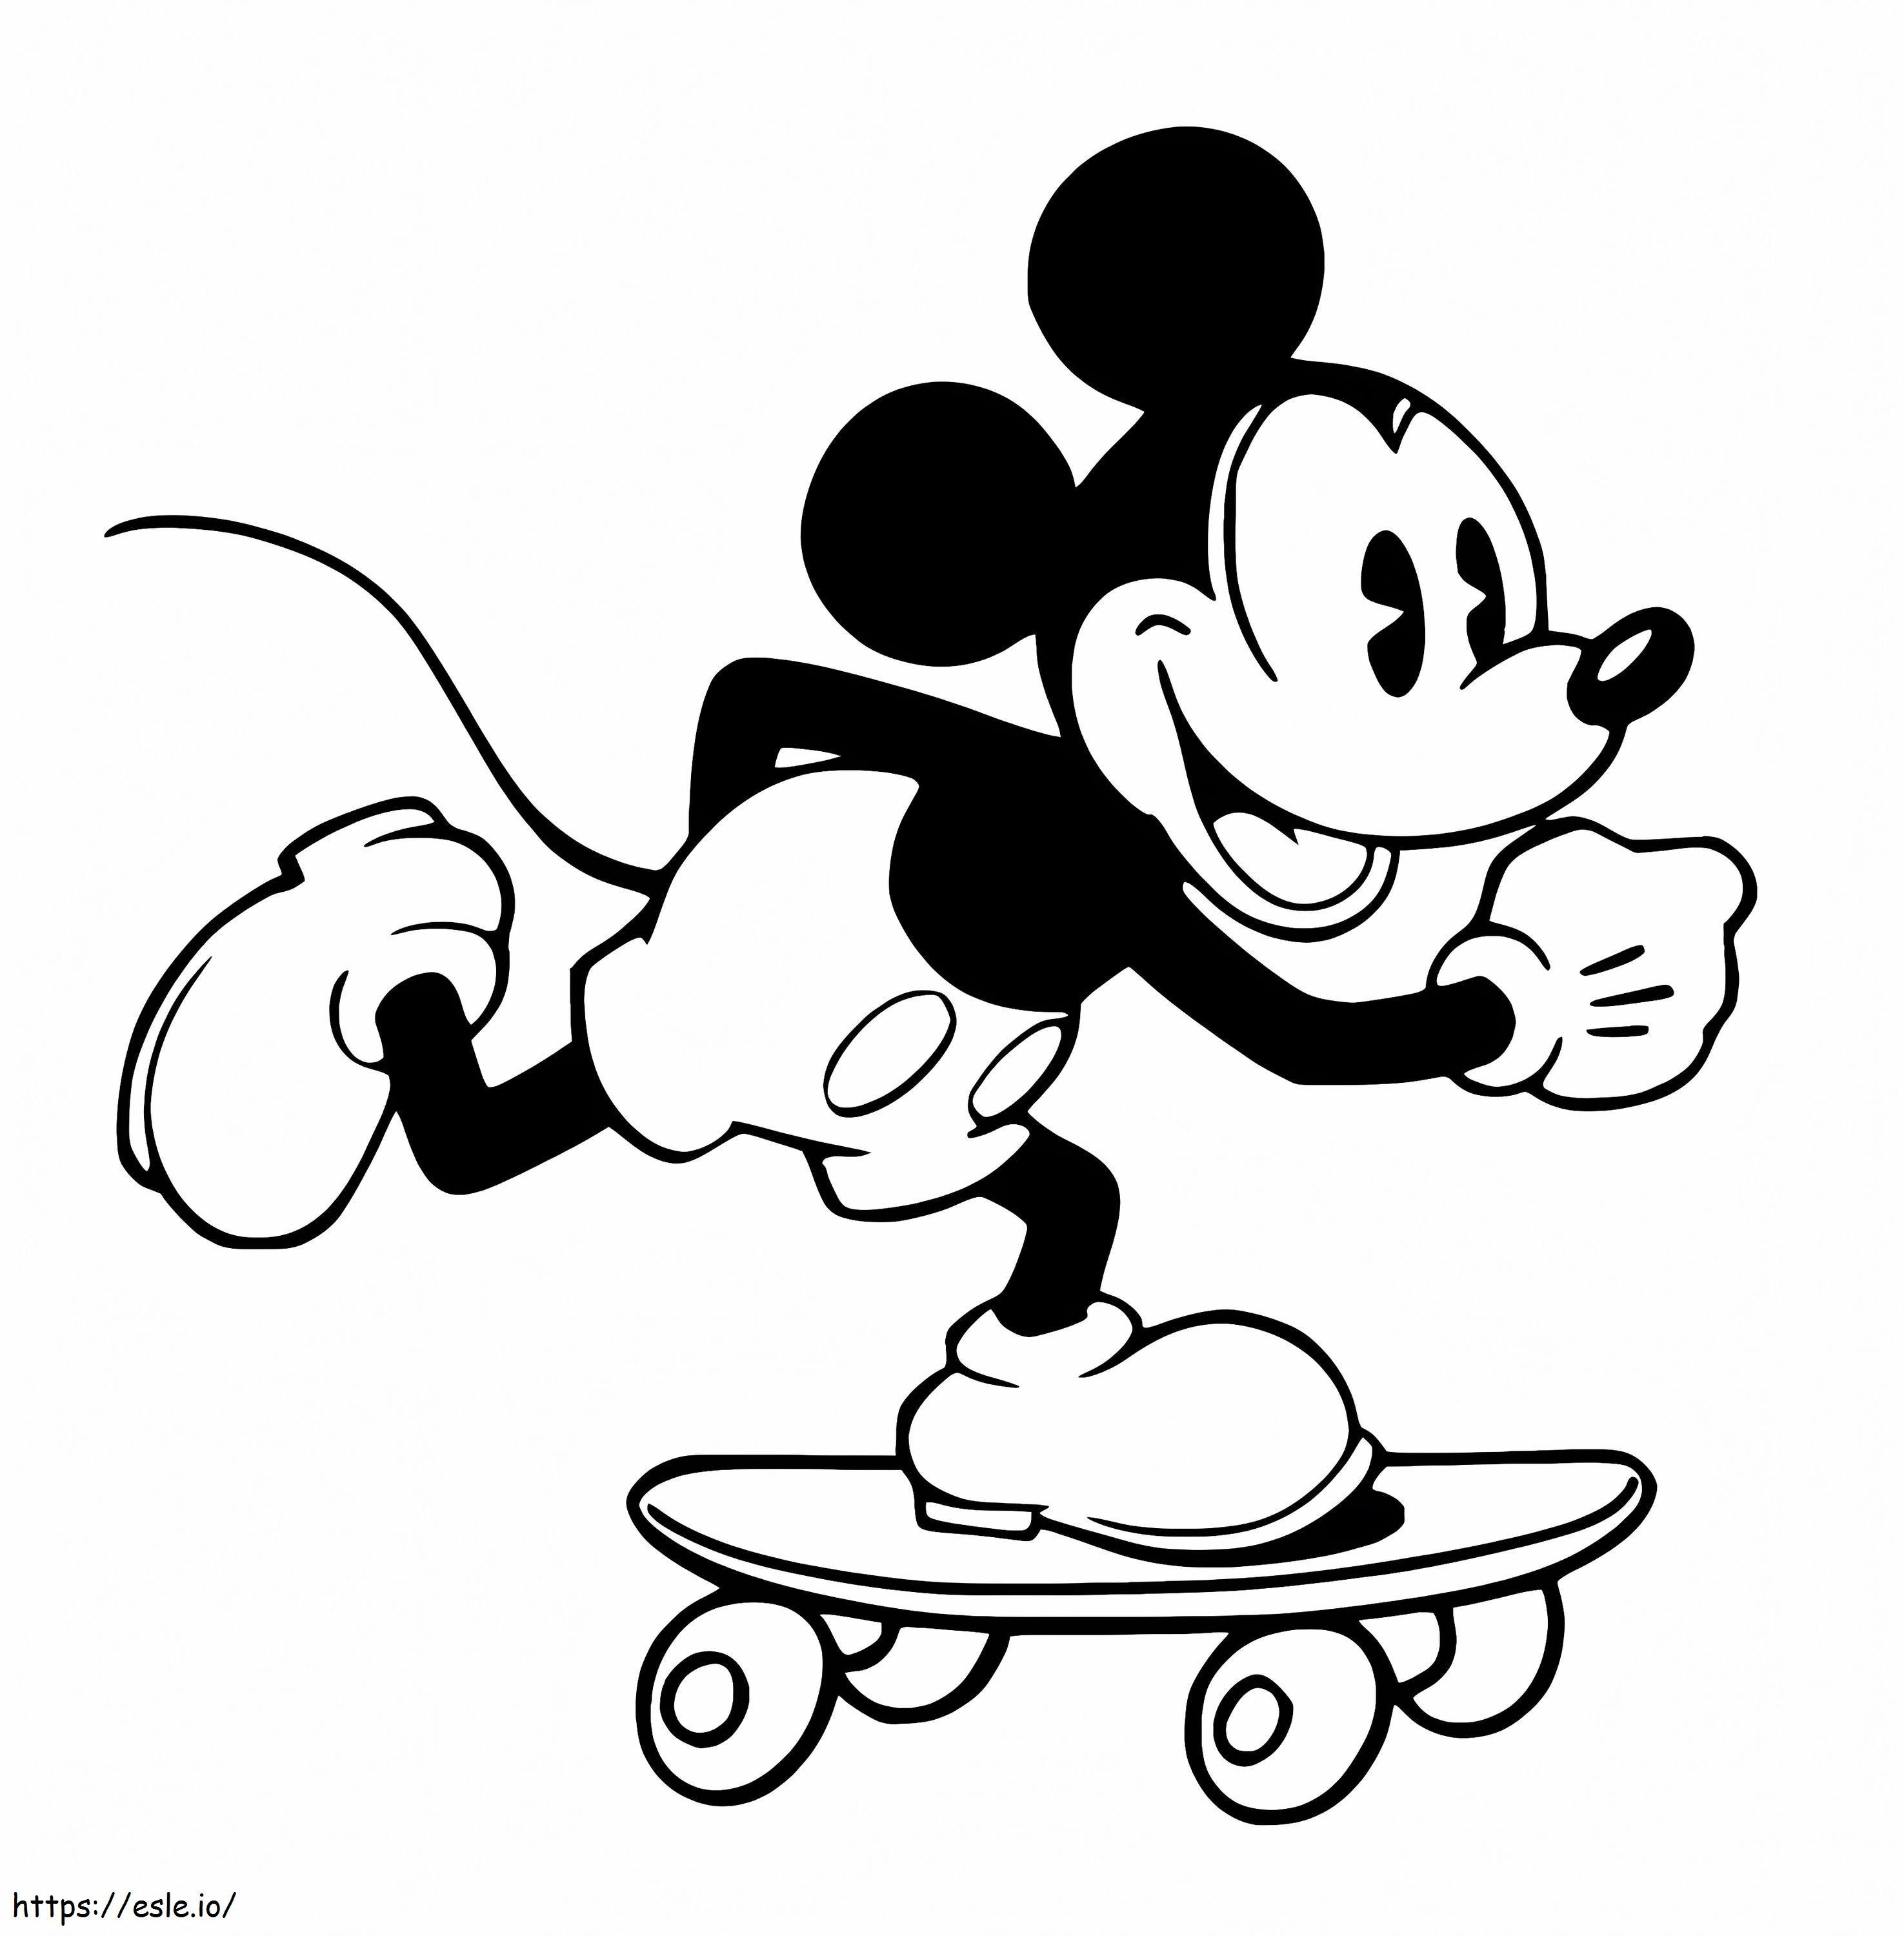 Mickey Mouse Playing Skateboard coloring page